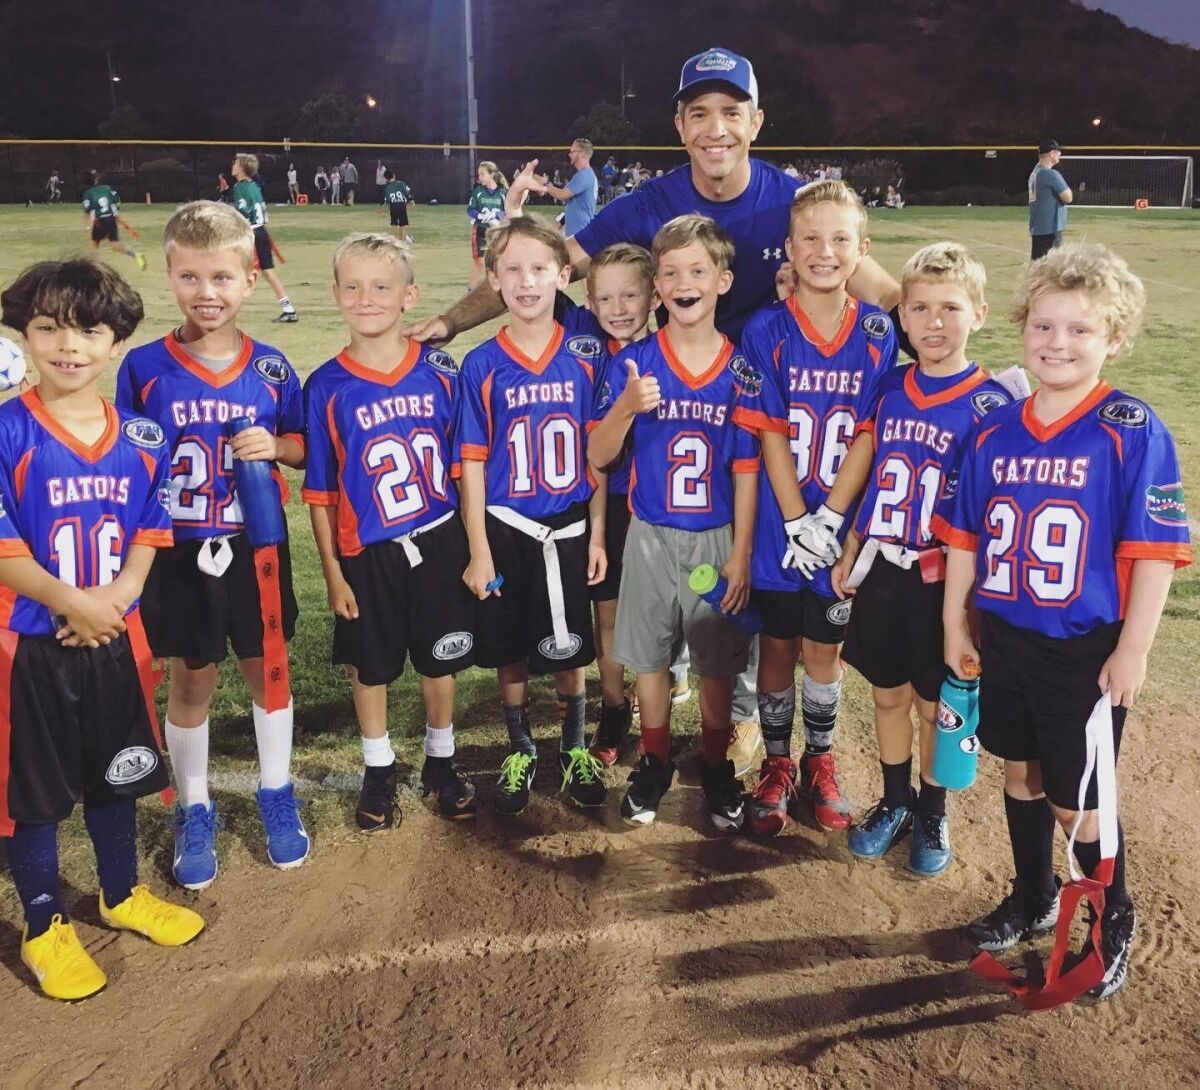 Fox 5 San Diego anchor and debut author Andrew Luria is shown coaching the flag football team of his son, Nathan (No. 2).